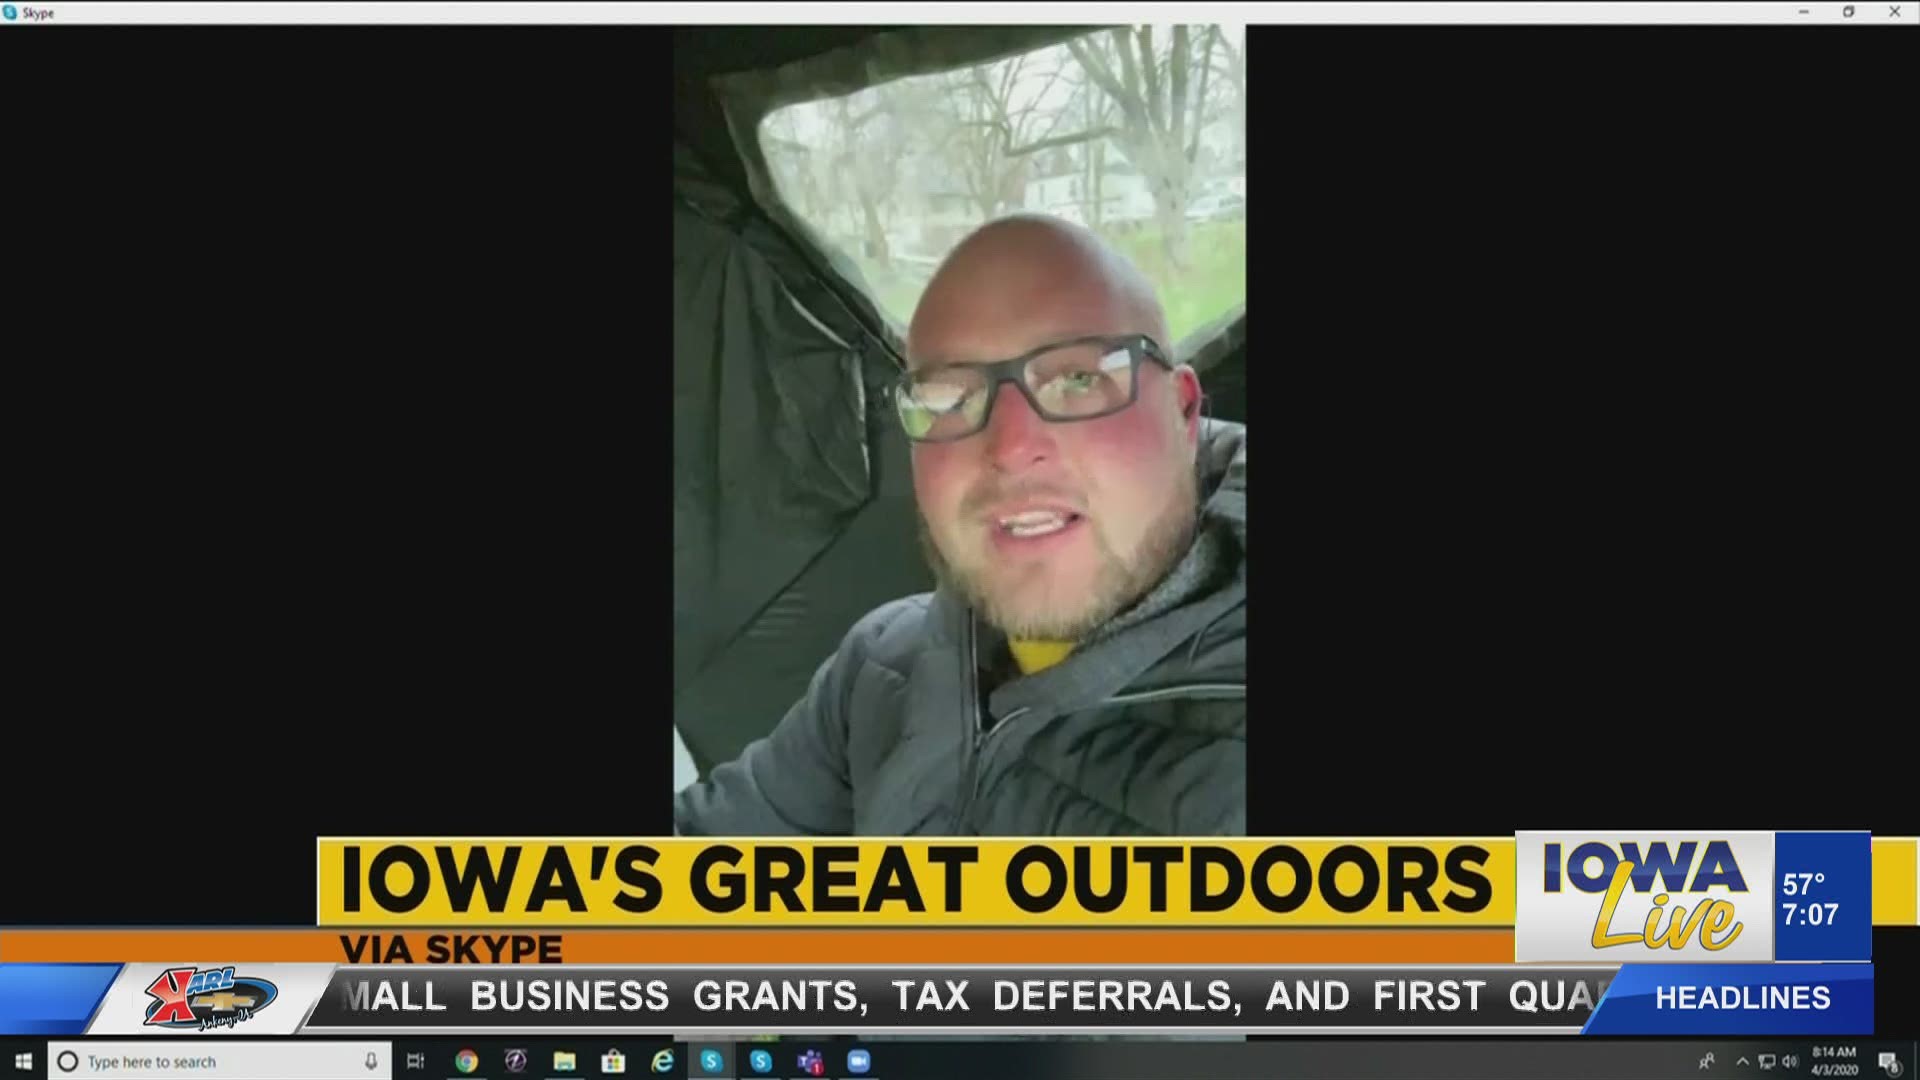 Chance is prepping for turkey season in Iowa's great outdoors